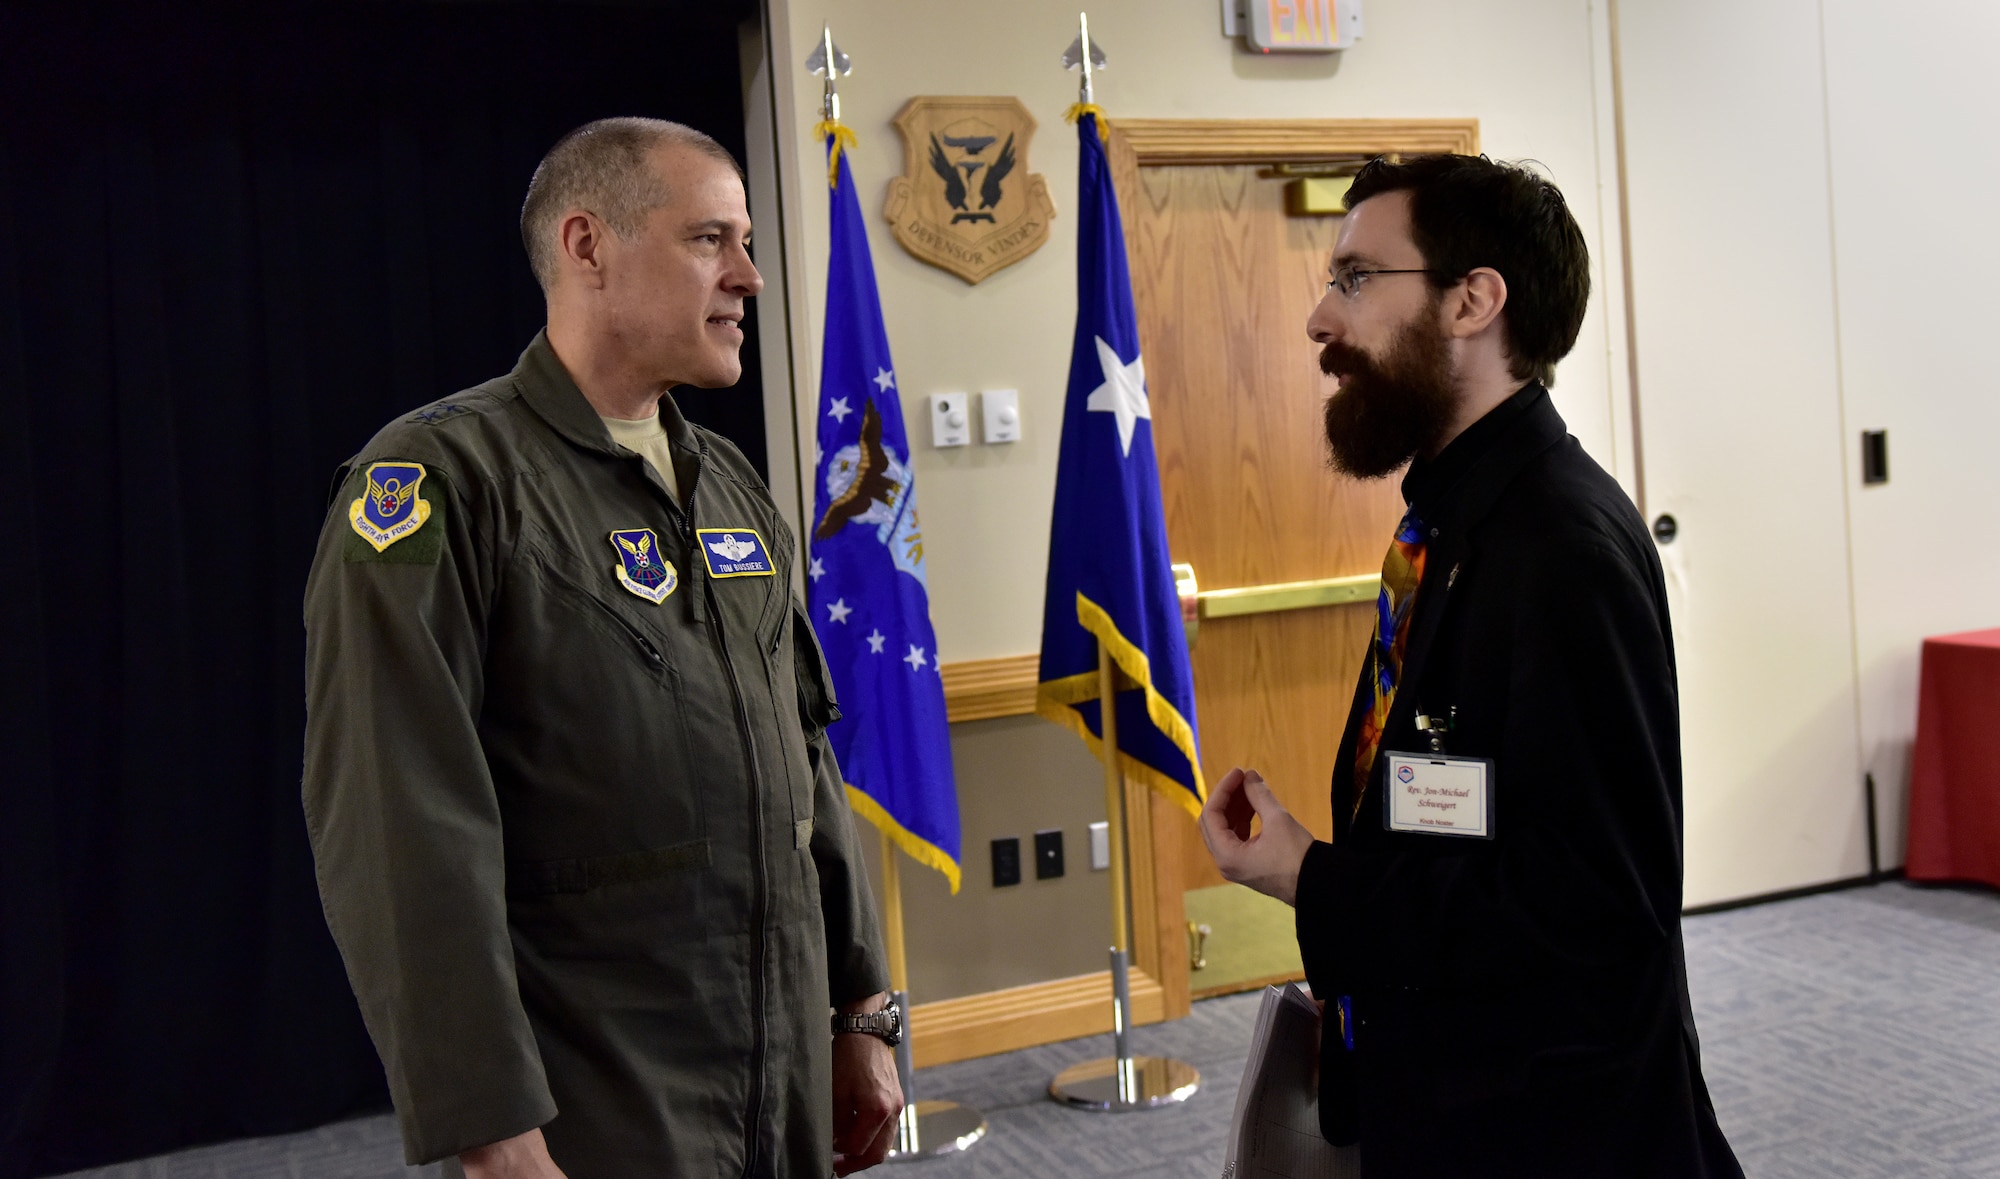 U.S. Air Force Maj. Gen. Thomas Bussiere, commander of the 8th Air Force, speaks with Rev. Jon-Michael Schweigert, the Knob Noster community liaison, following the monthly luncheon at Whiteman Air Force Base, Mo., Feb. 14, 2018.